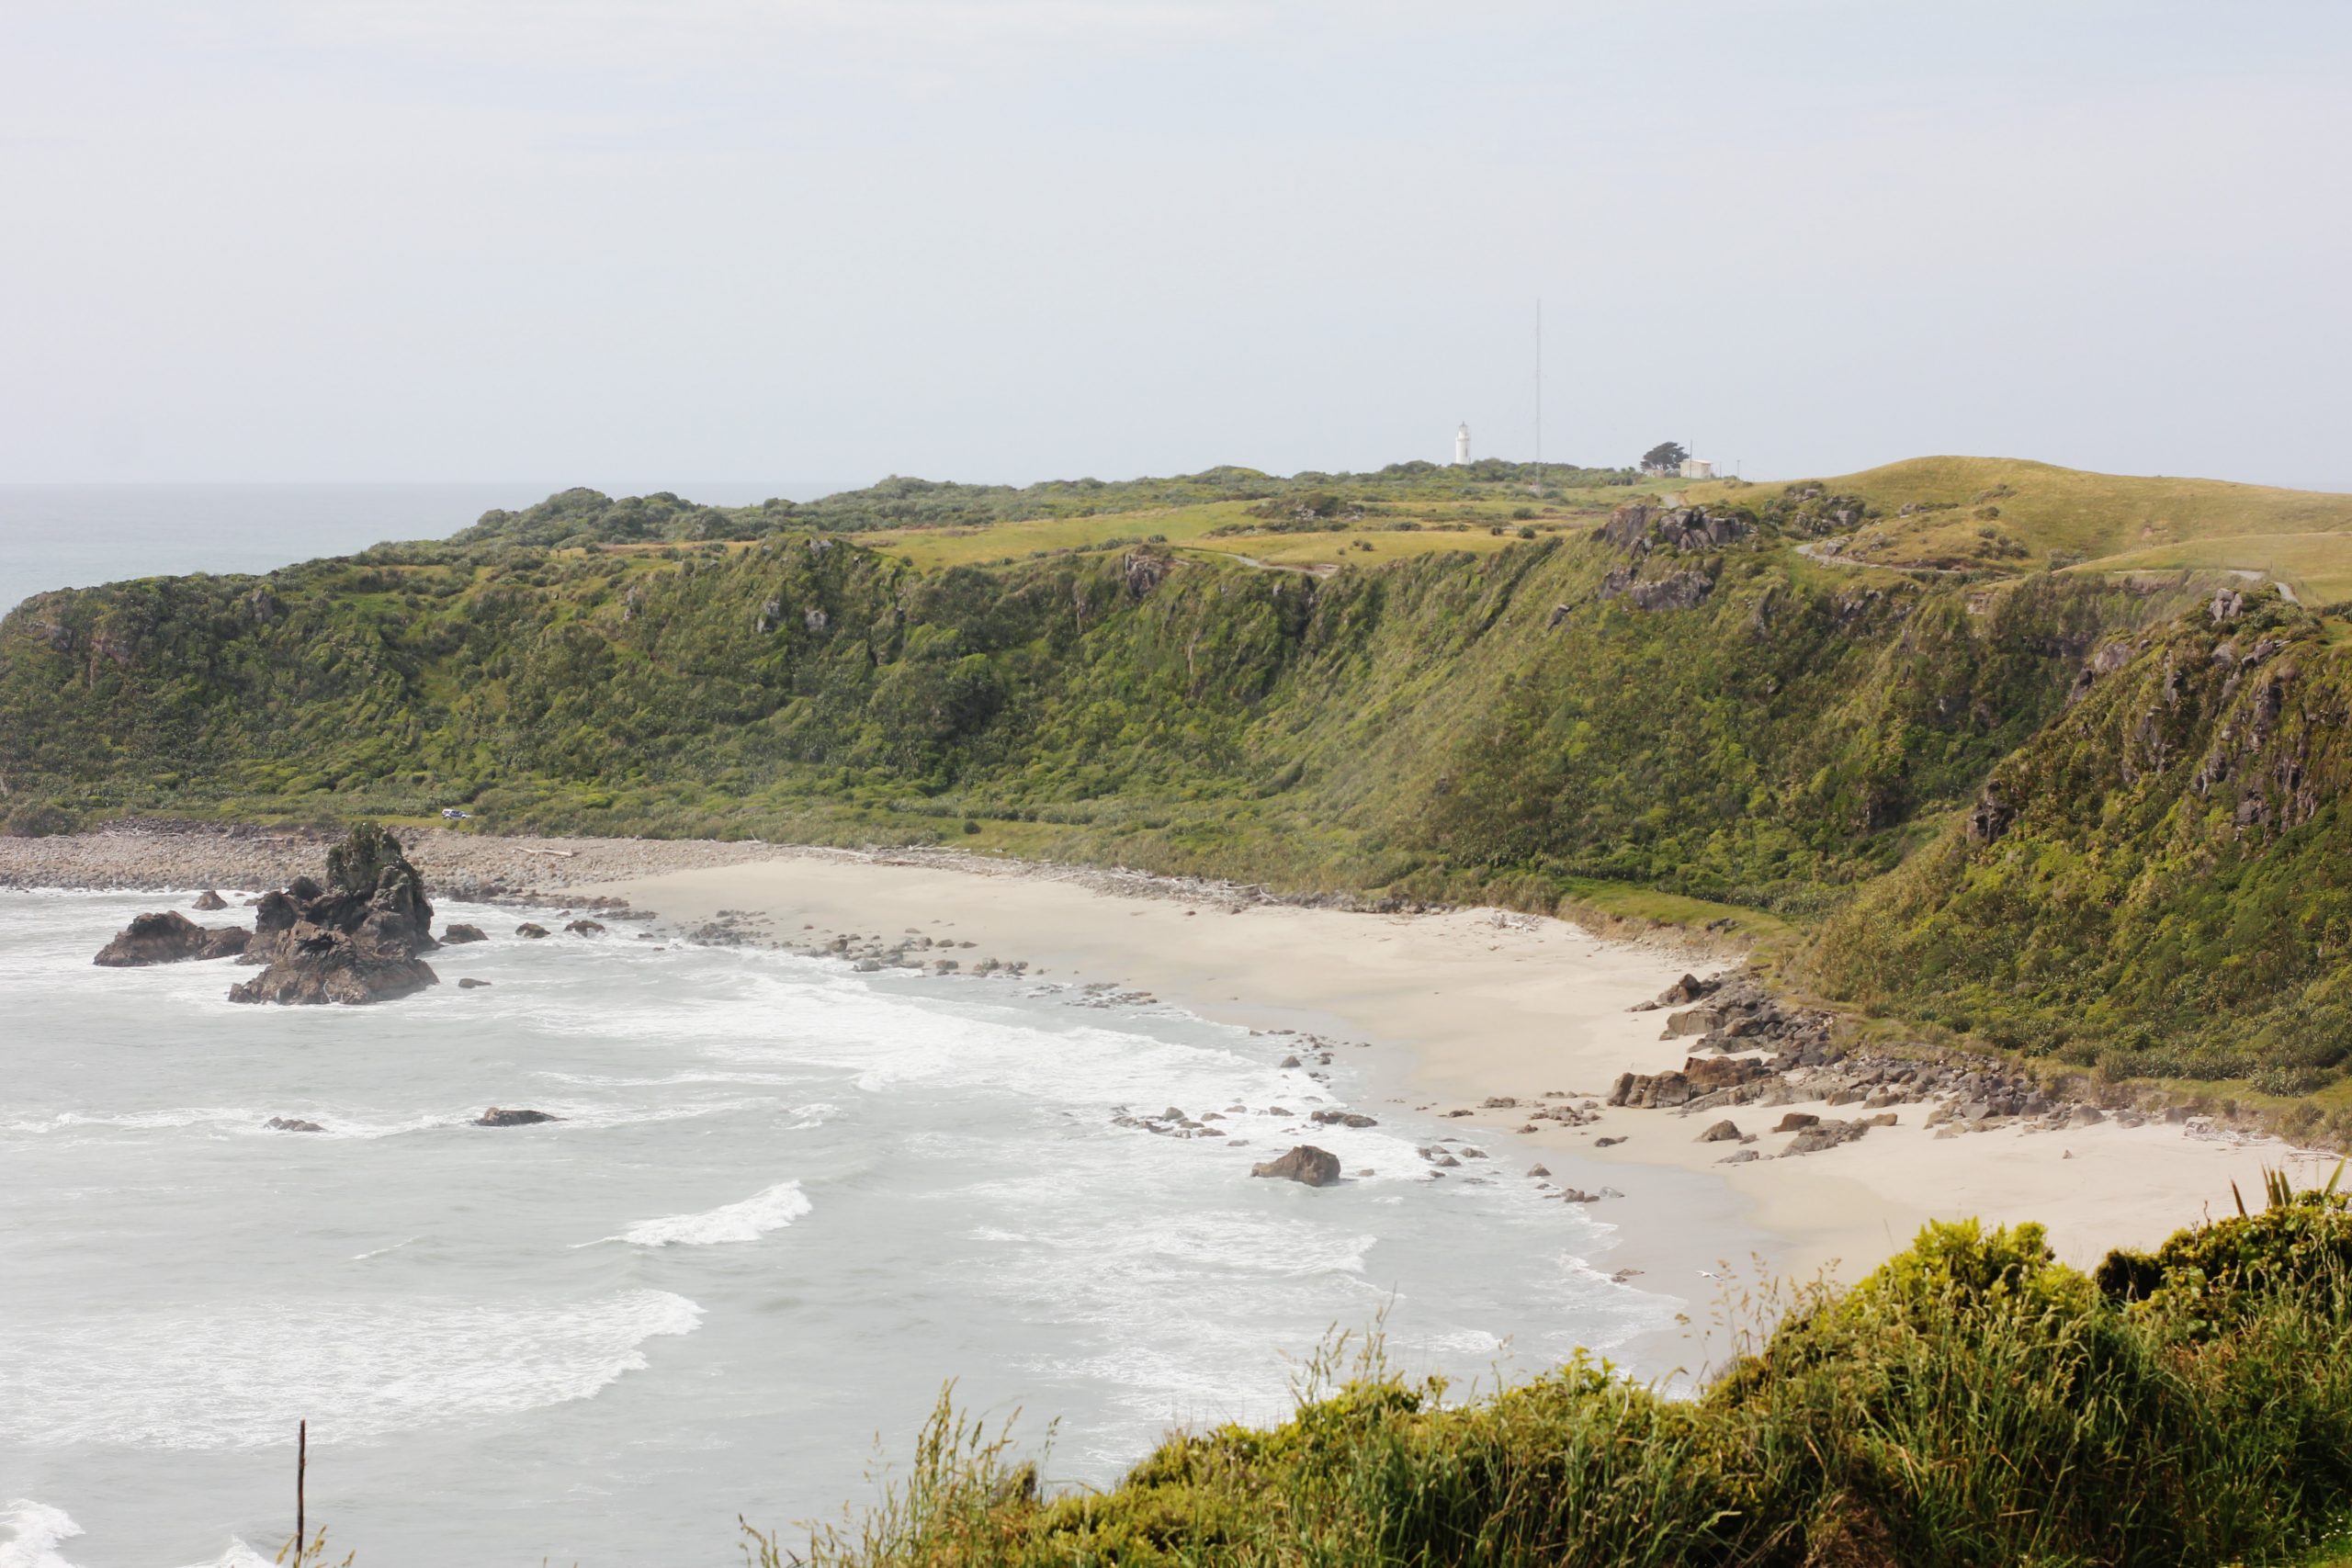 A rocky beach with moderate waves flanked by grassy headland.